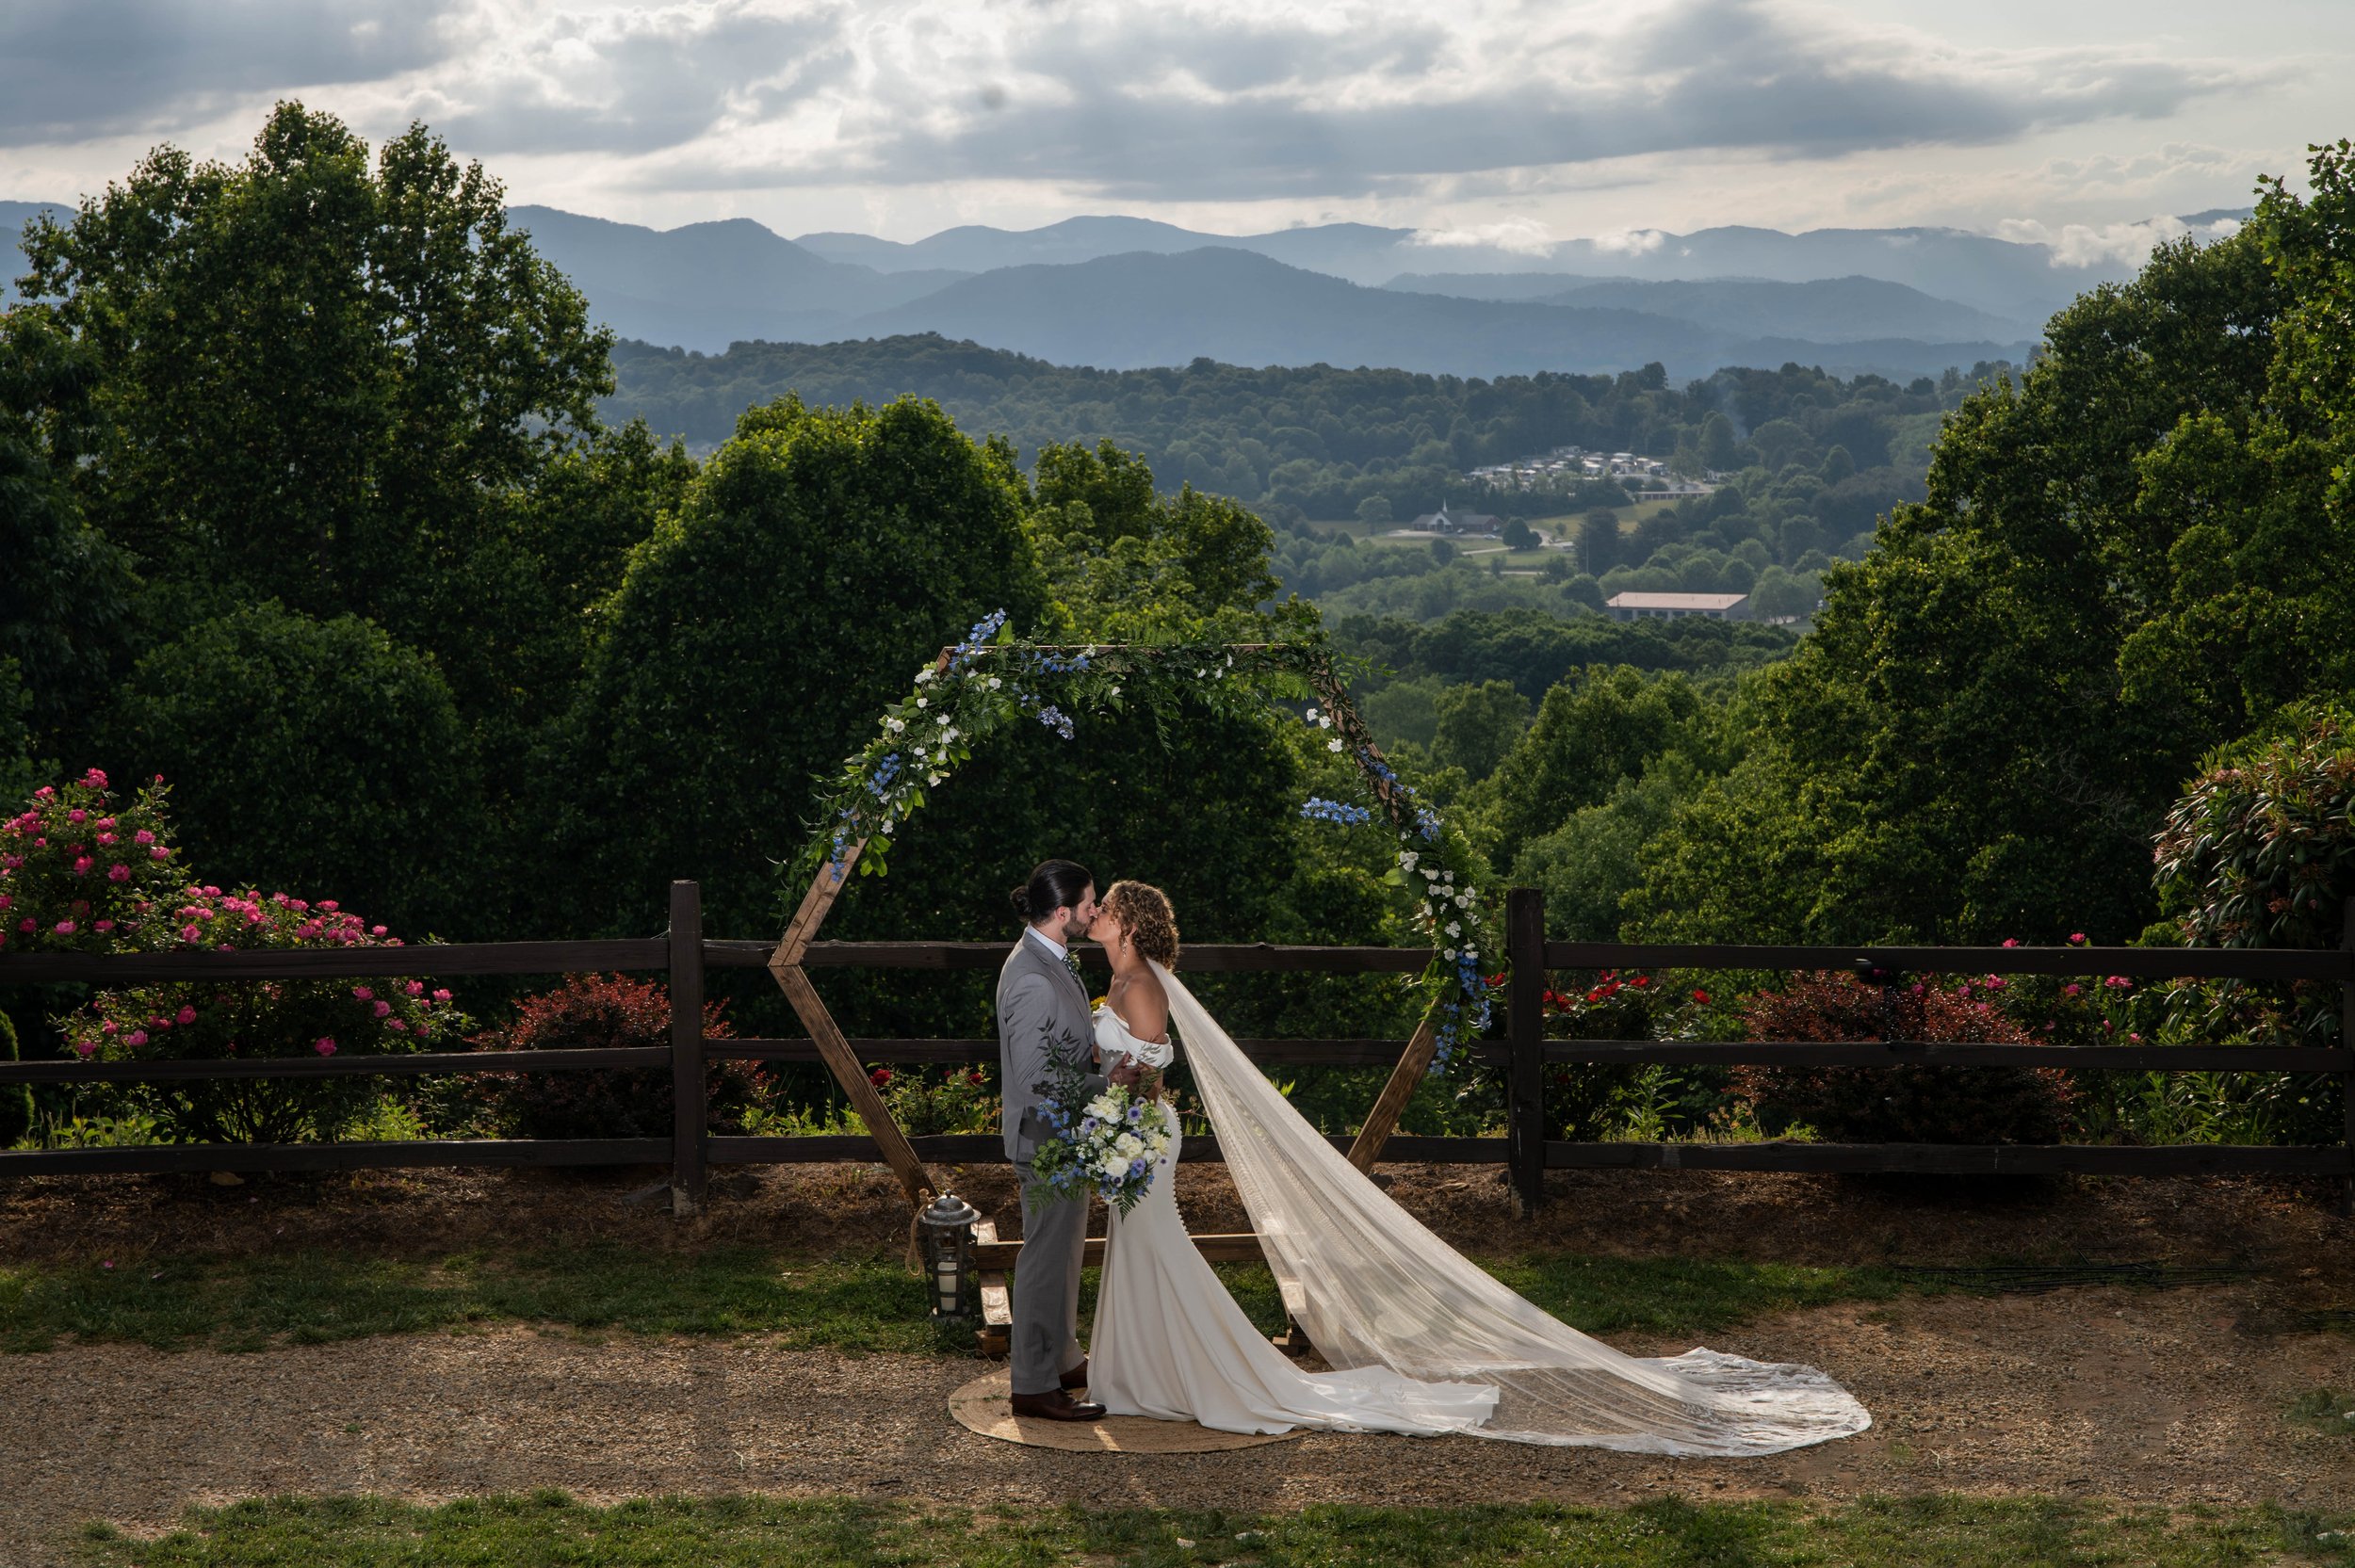 The Ridge – Weddings and Events Venue in Asheville